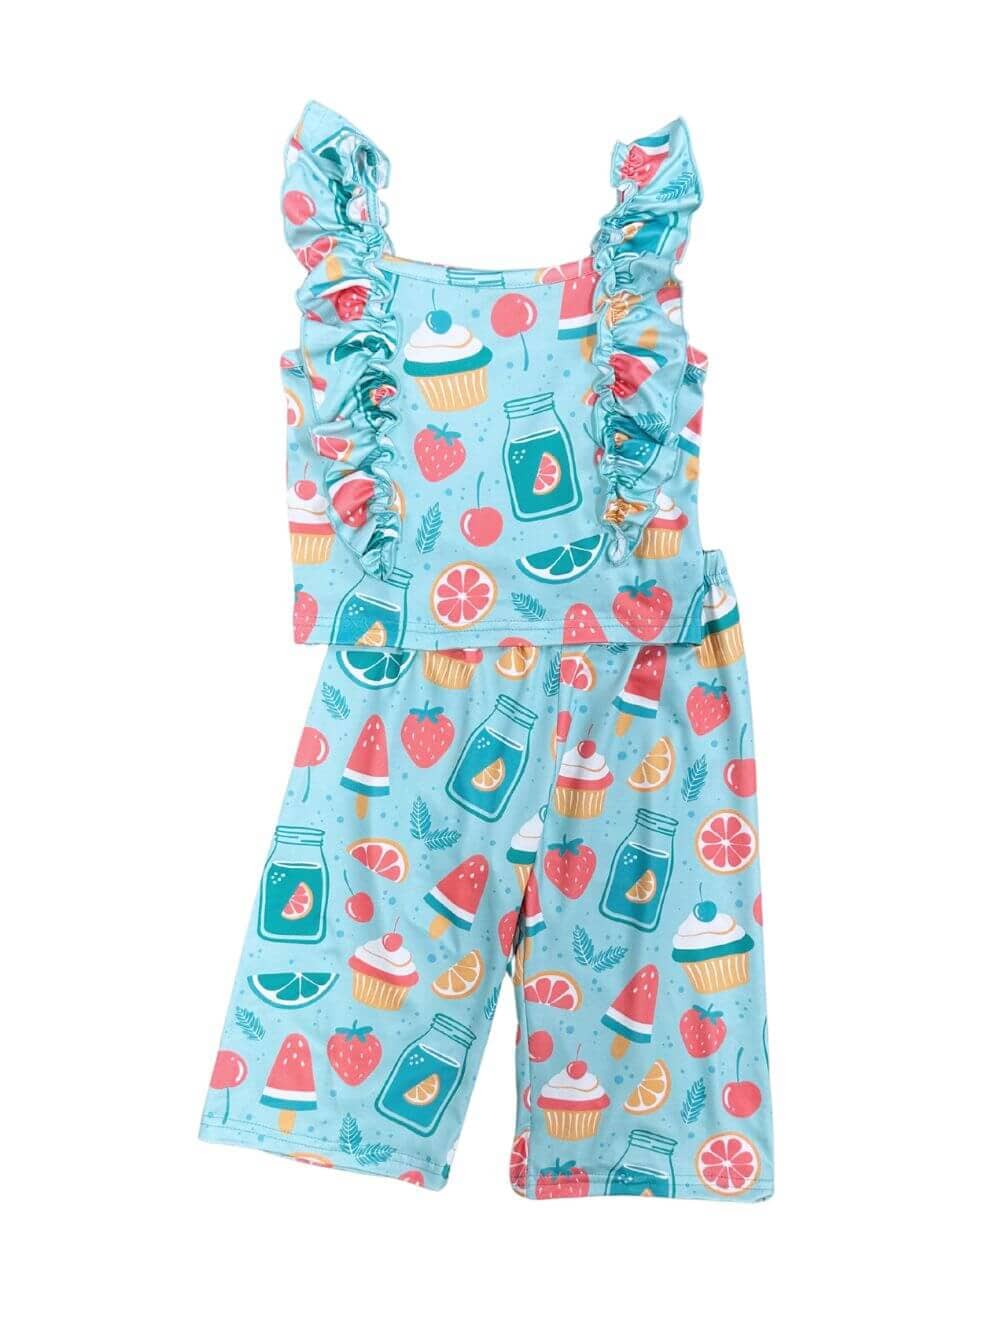 Baby Girls' Dresses Cotton Clothes Top Pant Set 3-4 Years Kids Summer Wear  Combo Children Birthday Party Outfit White:Blue & Orange:Green Tiny Bunnies  : Amazon.in: Clothing & Accessories